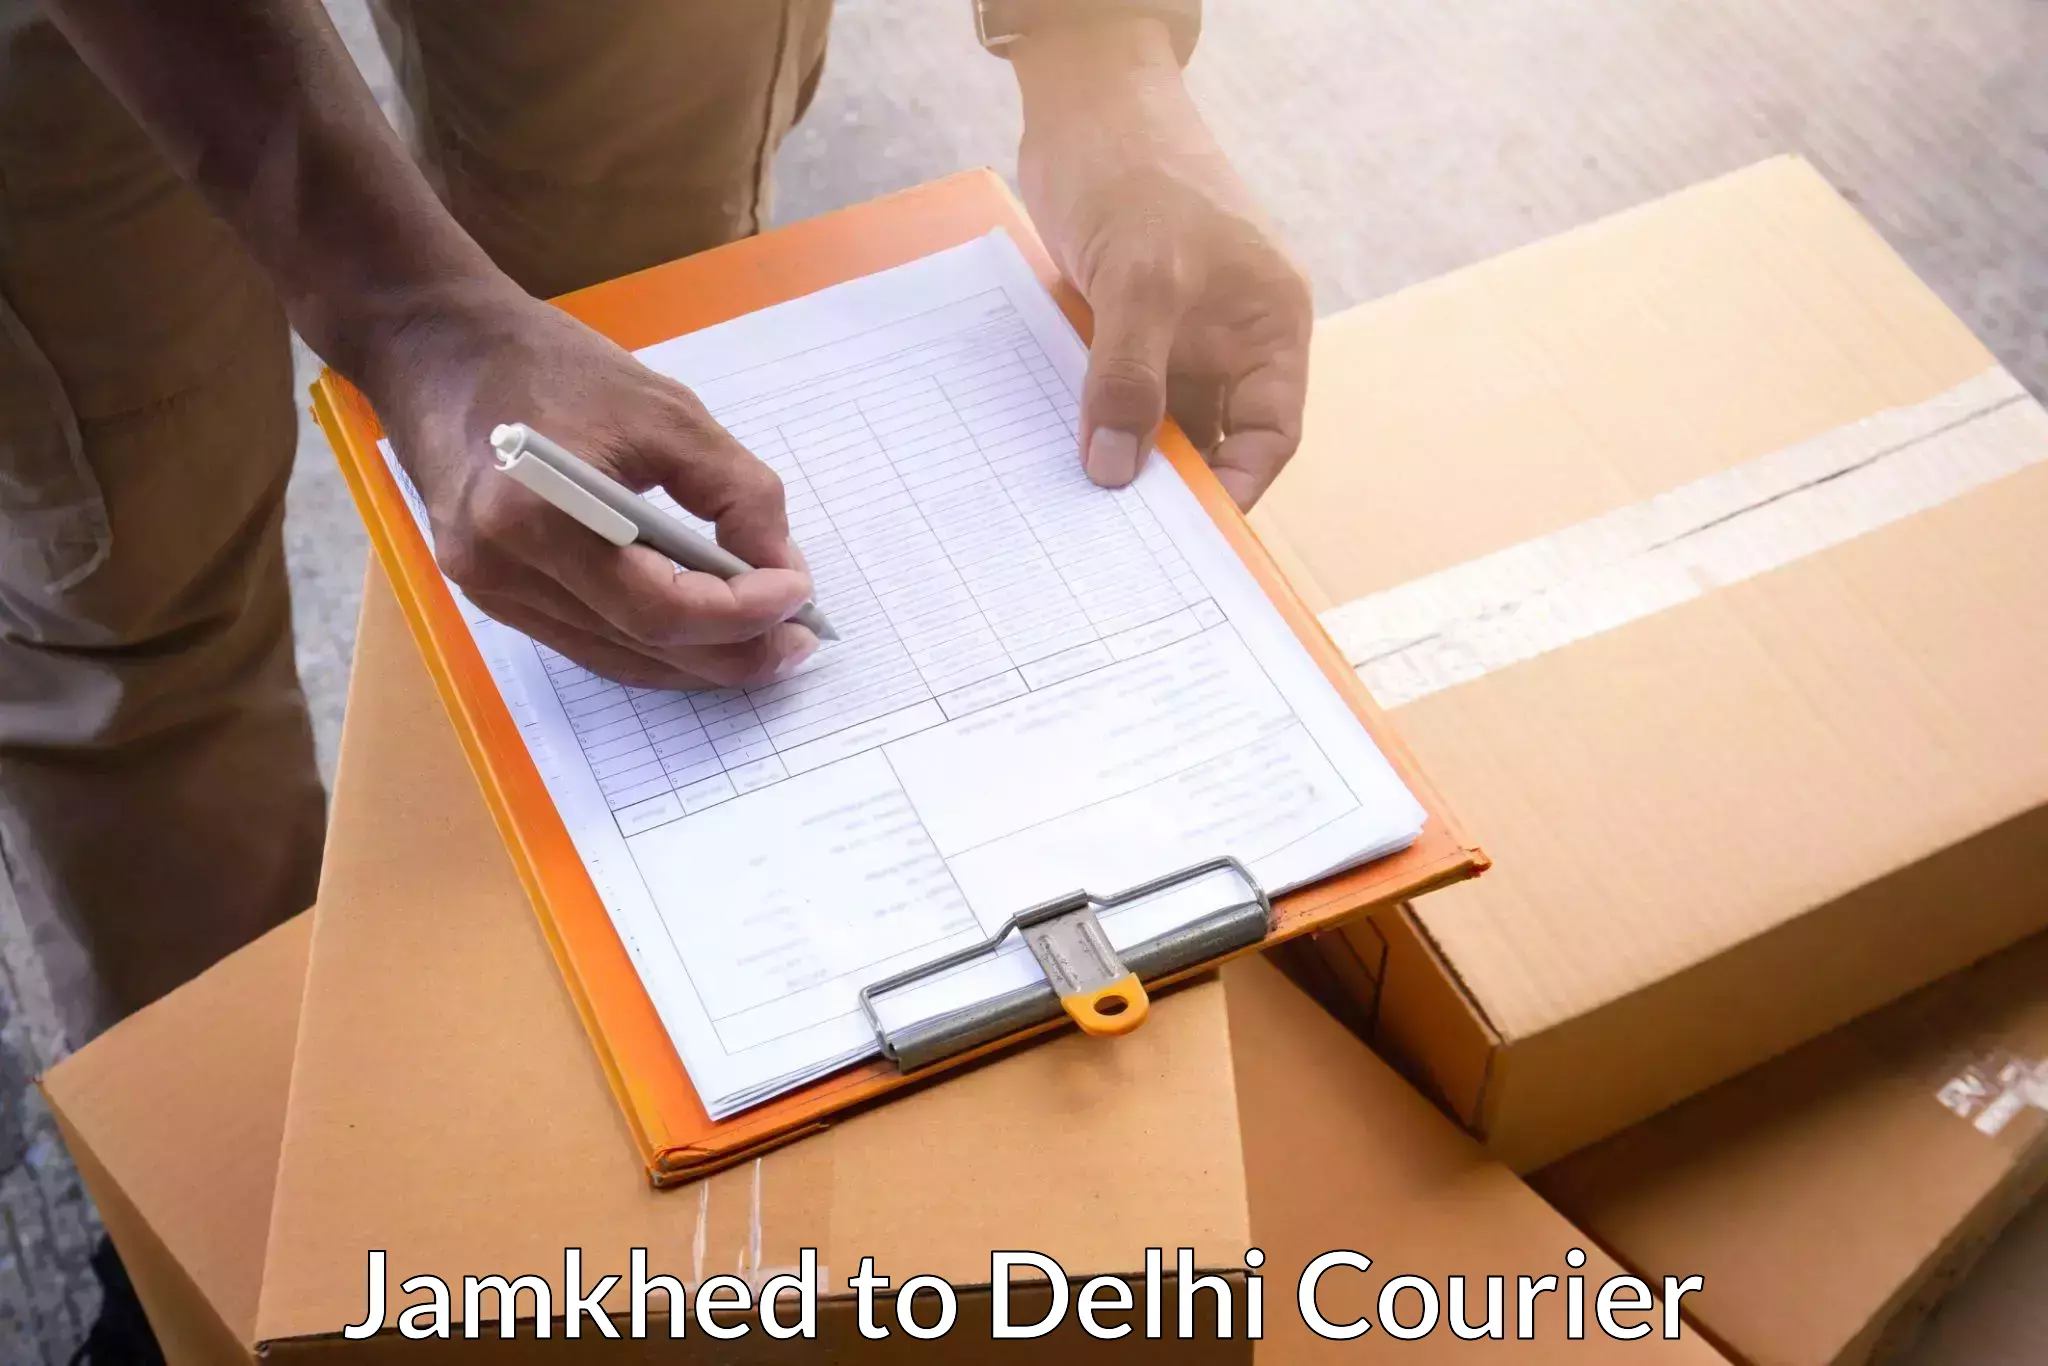 Rapid freight solutions Jamkhed to Delhi